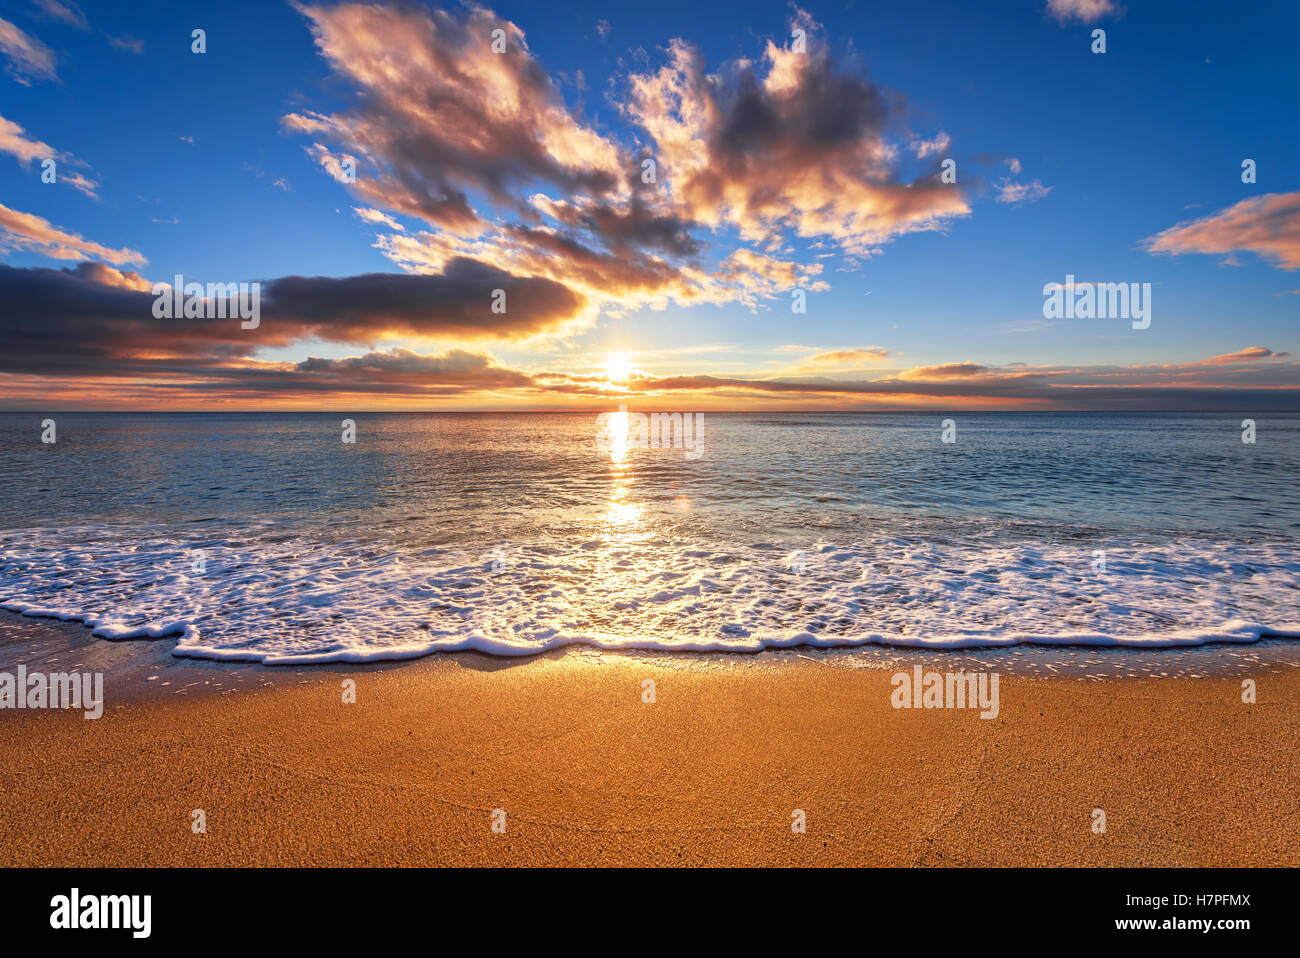 Panoramic dramatic sunset sky and tropical sea at dusk Stock Photo